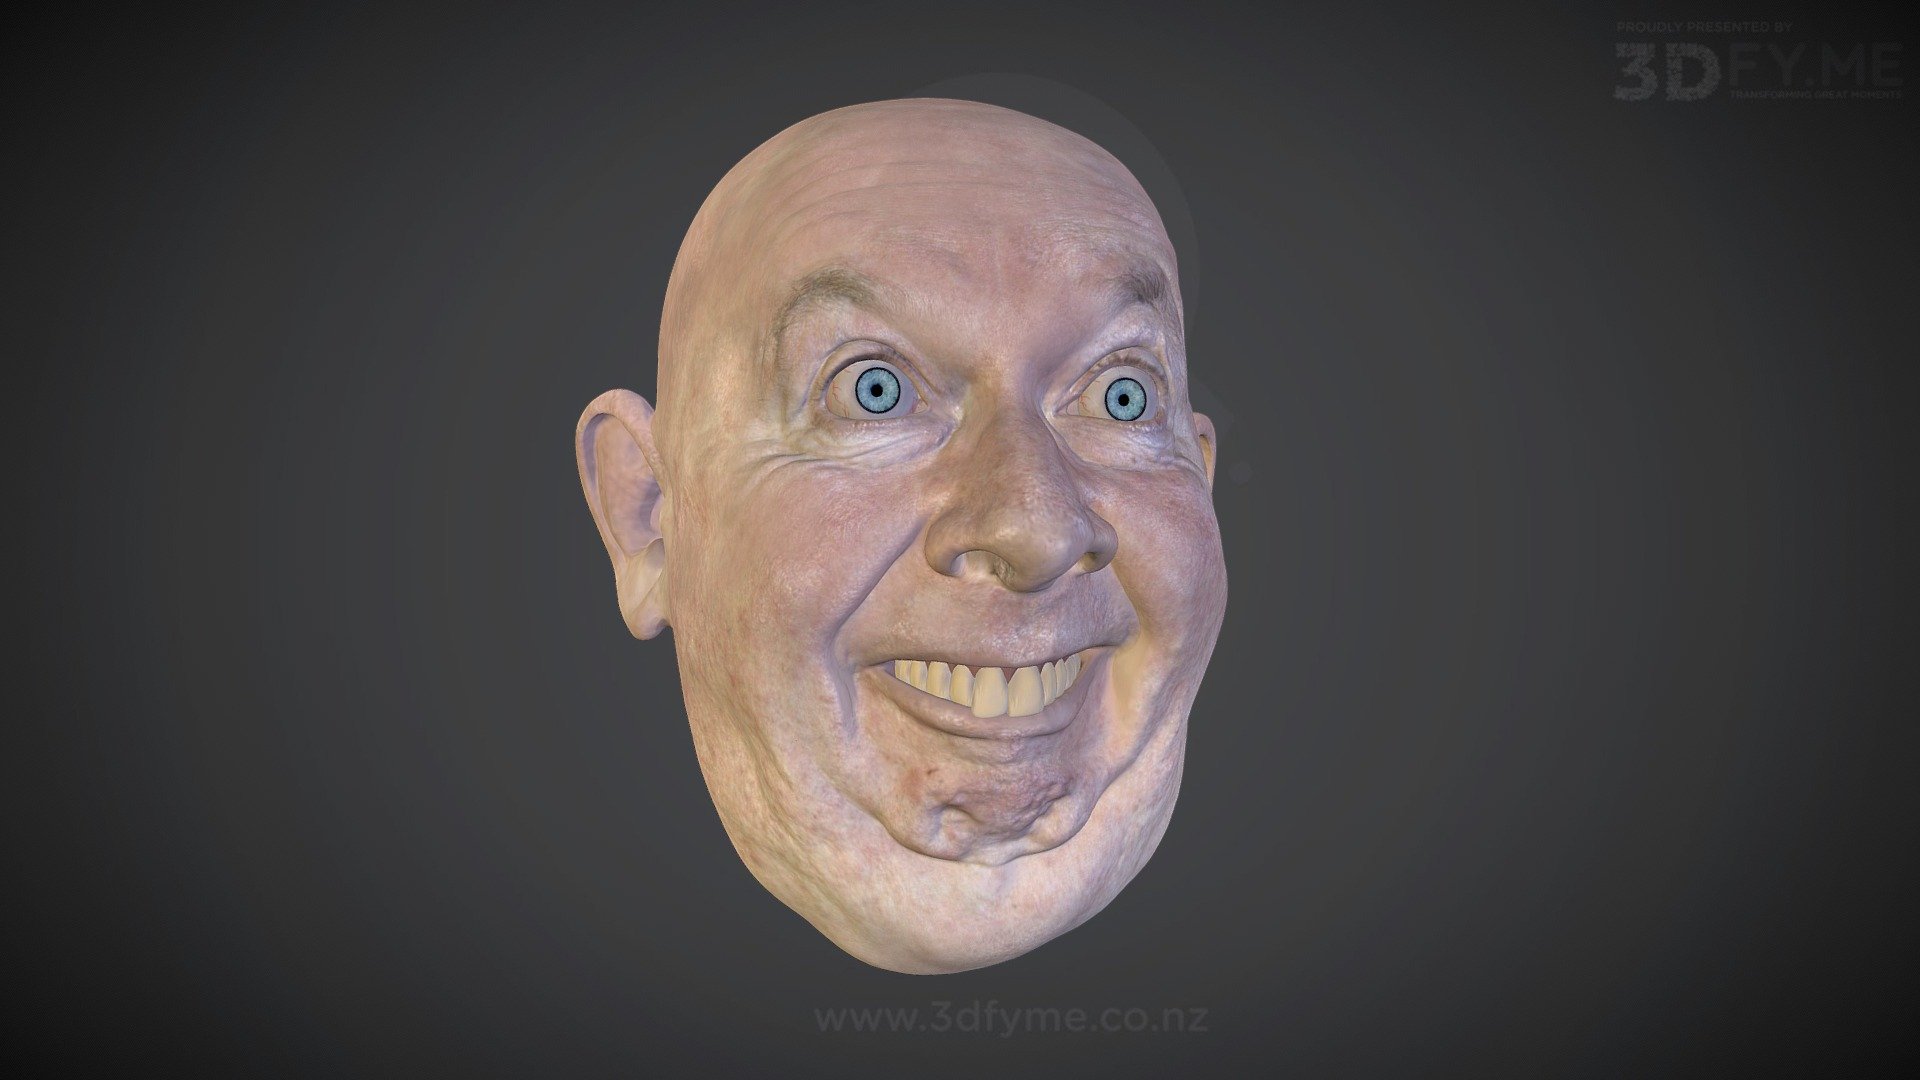 We love Howard's creations &hellip;tuning a face scan into weird, creepy pieces of art :)) - Grotesque Facial Mask by Howard Sly - 3D model by 3Dfy.me New Zealand (@smacher2016) 3d model